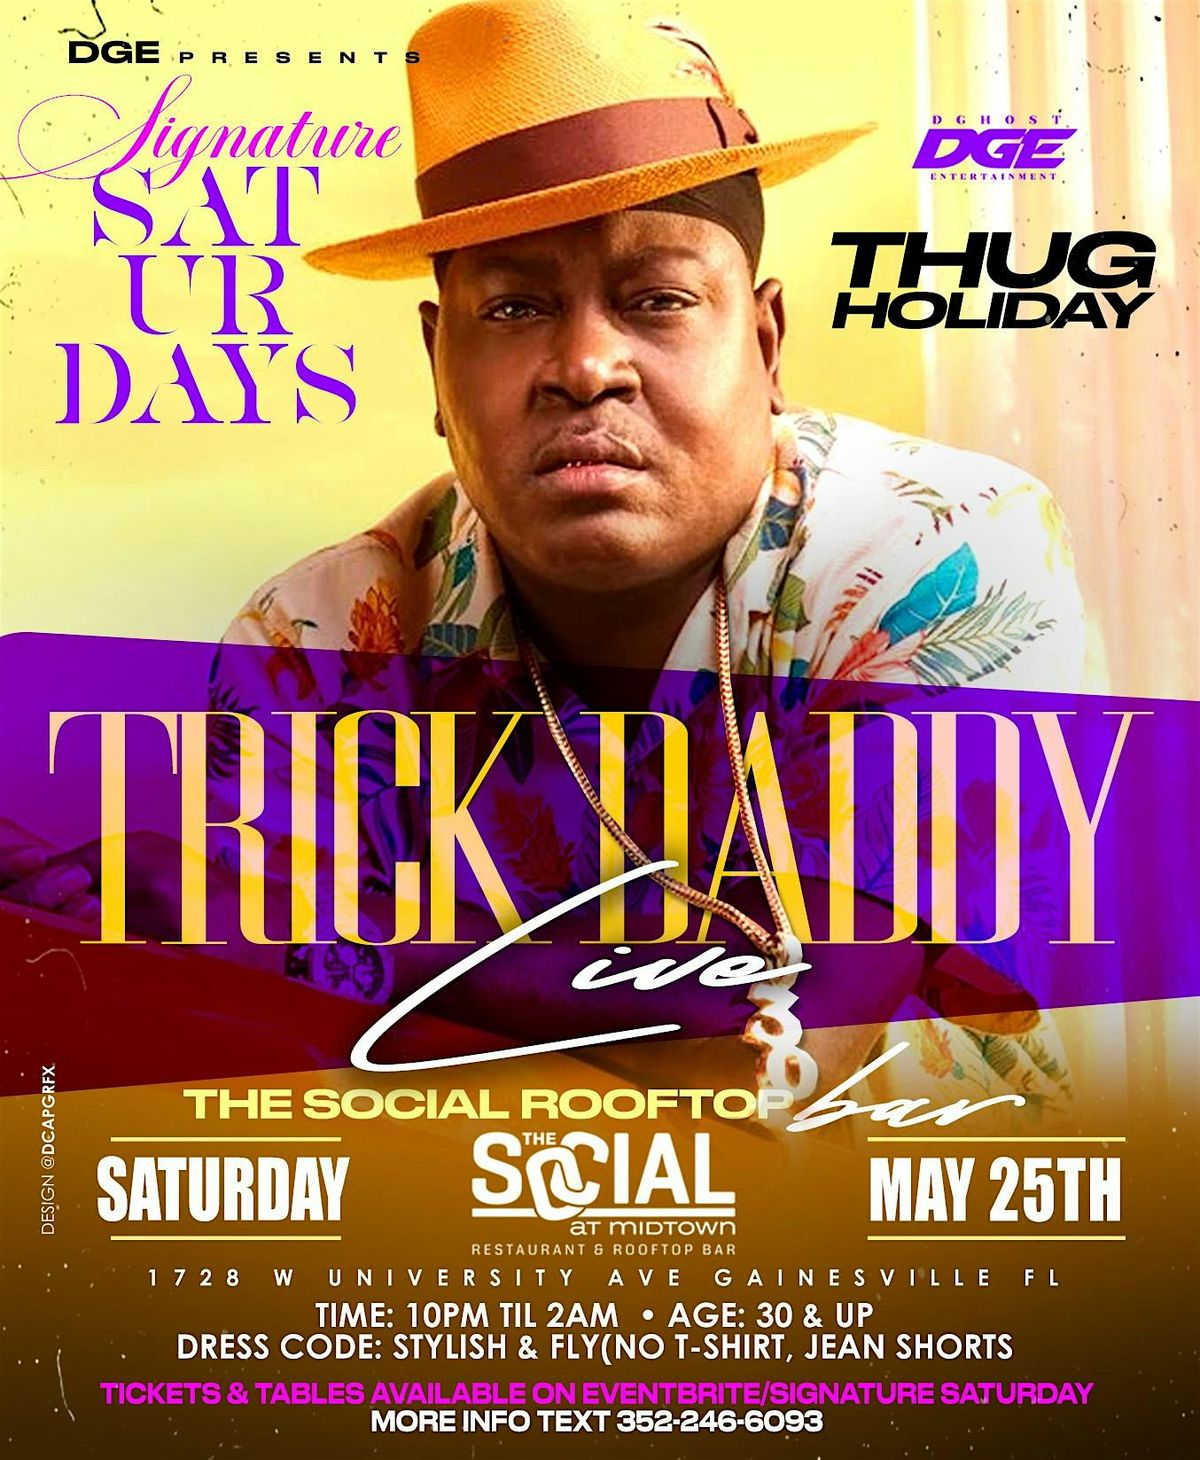 Signature Saturday \u201cThug Holiday\u201d with Trick Daddy Live at The Social